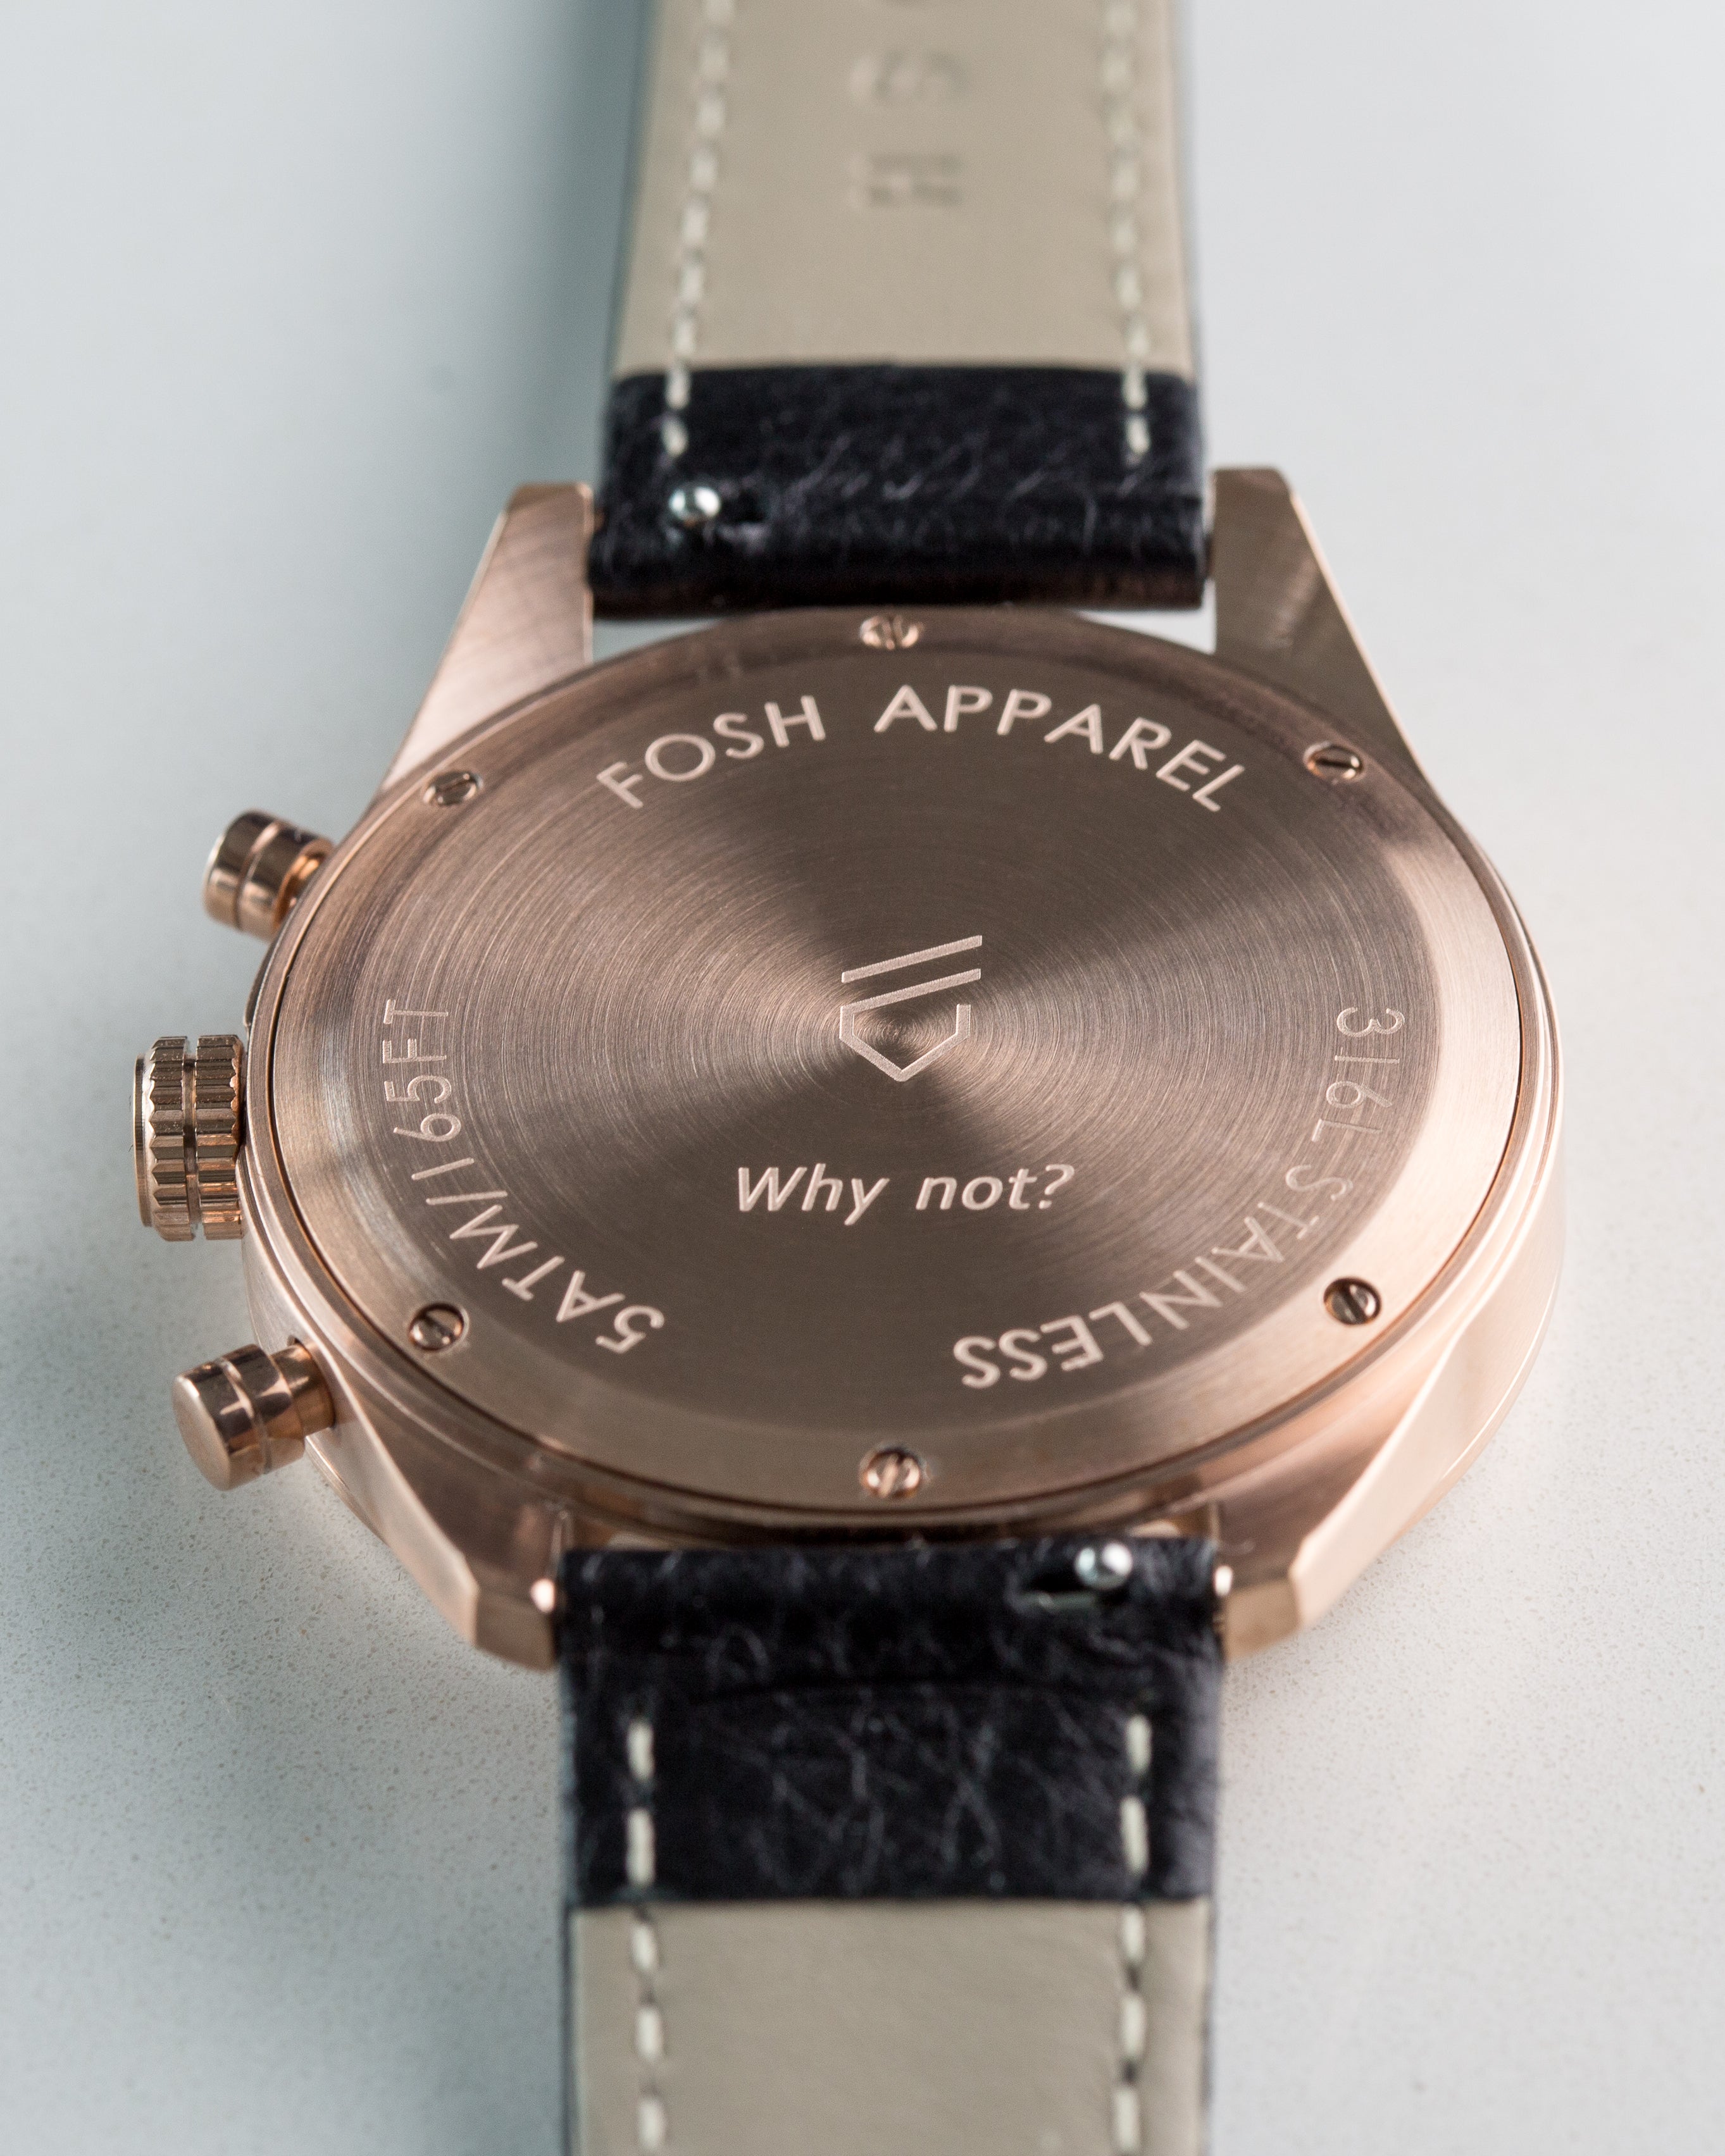 Back of rose gold watch case with engraved logo reading "why not"